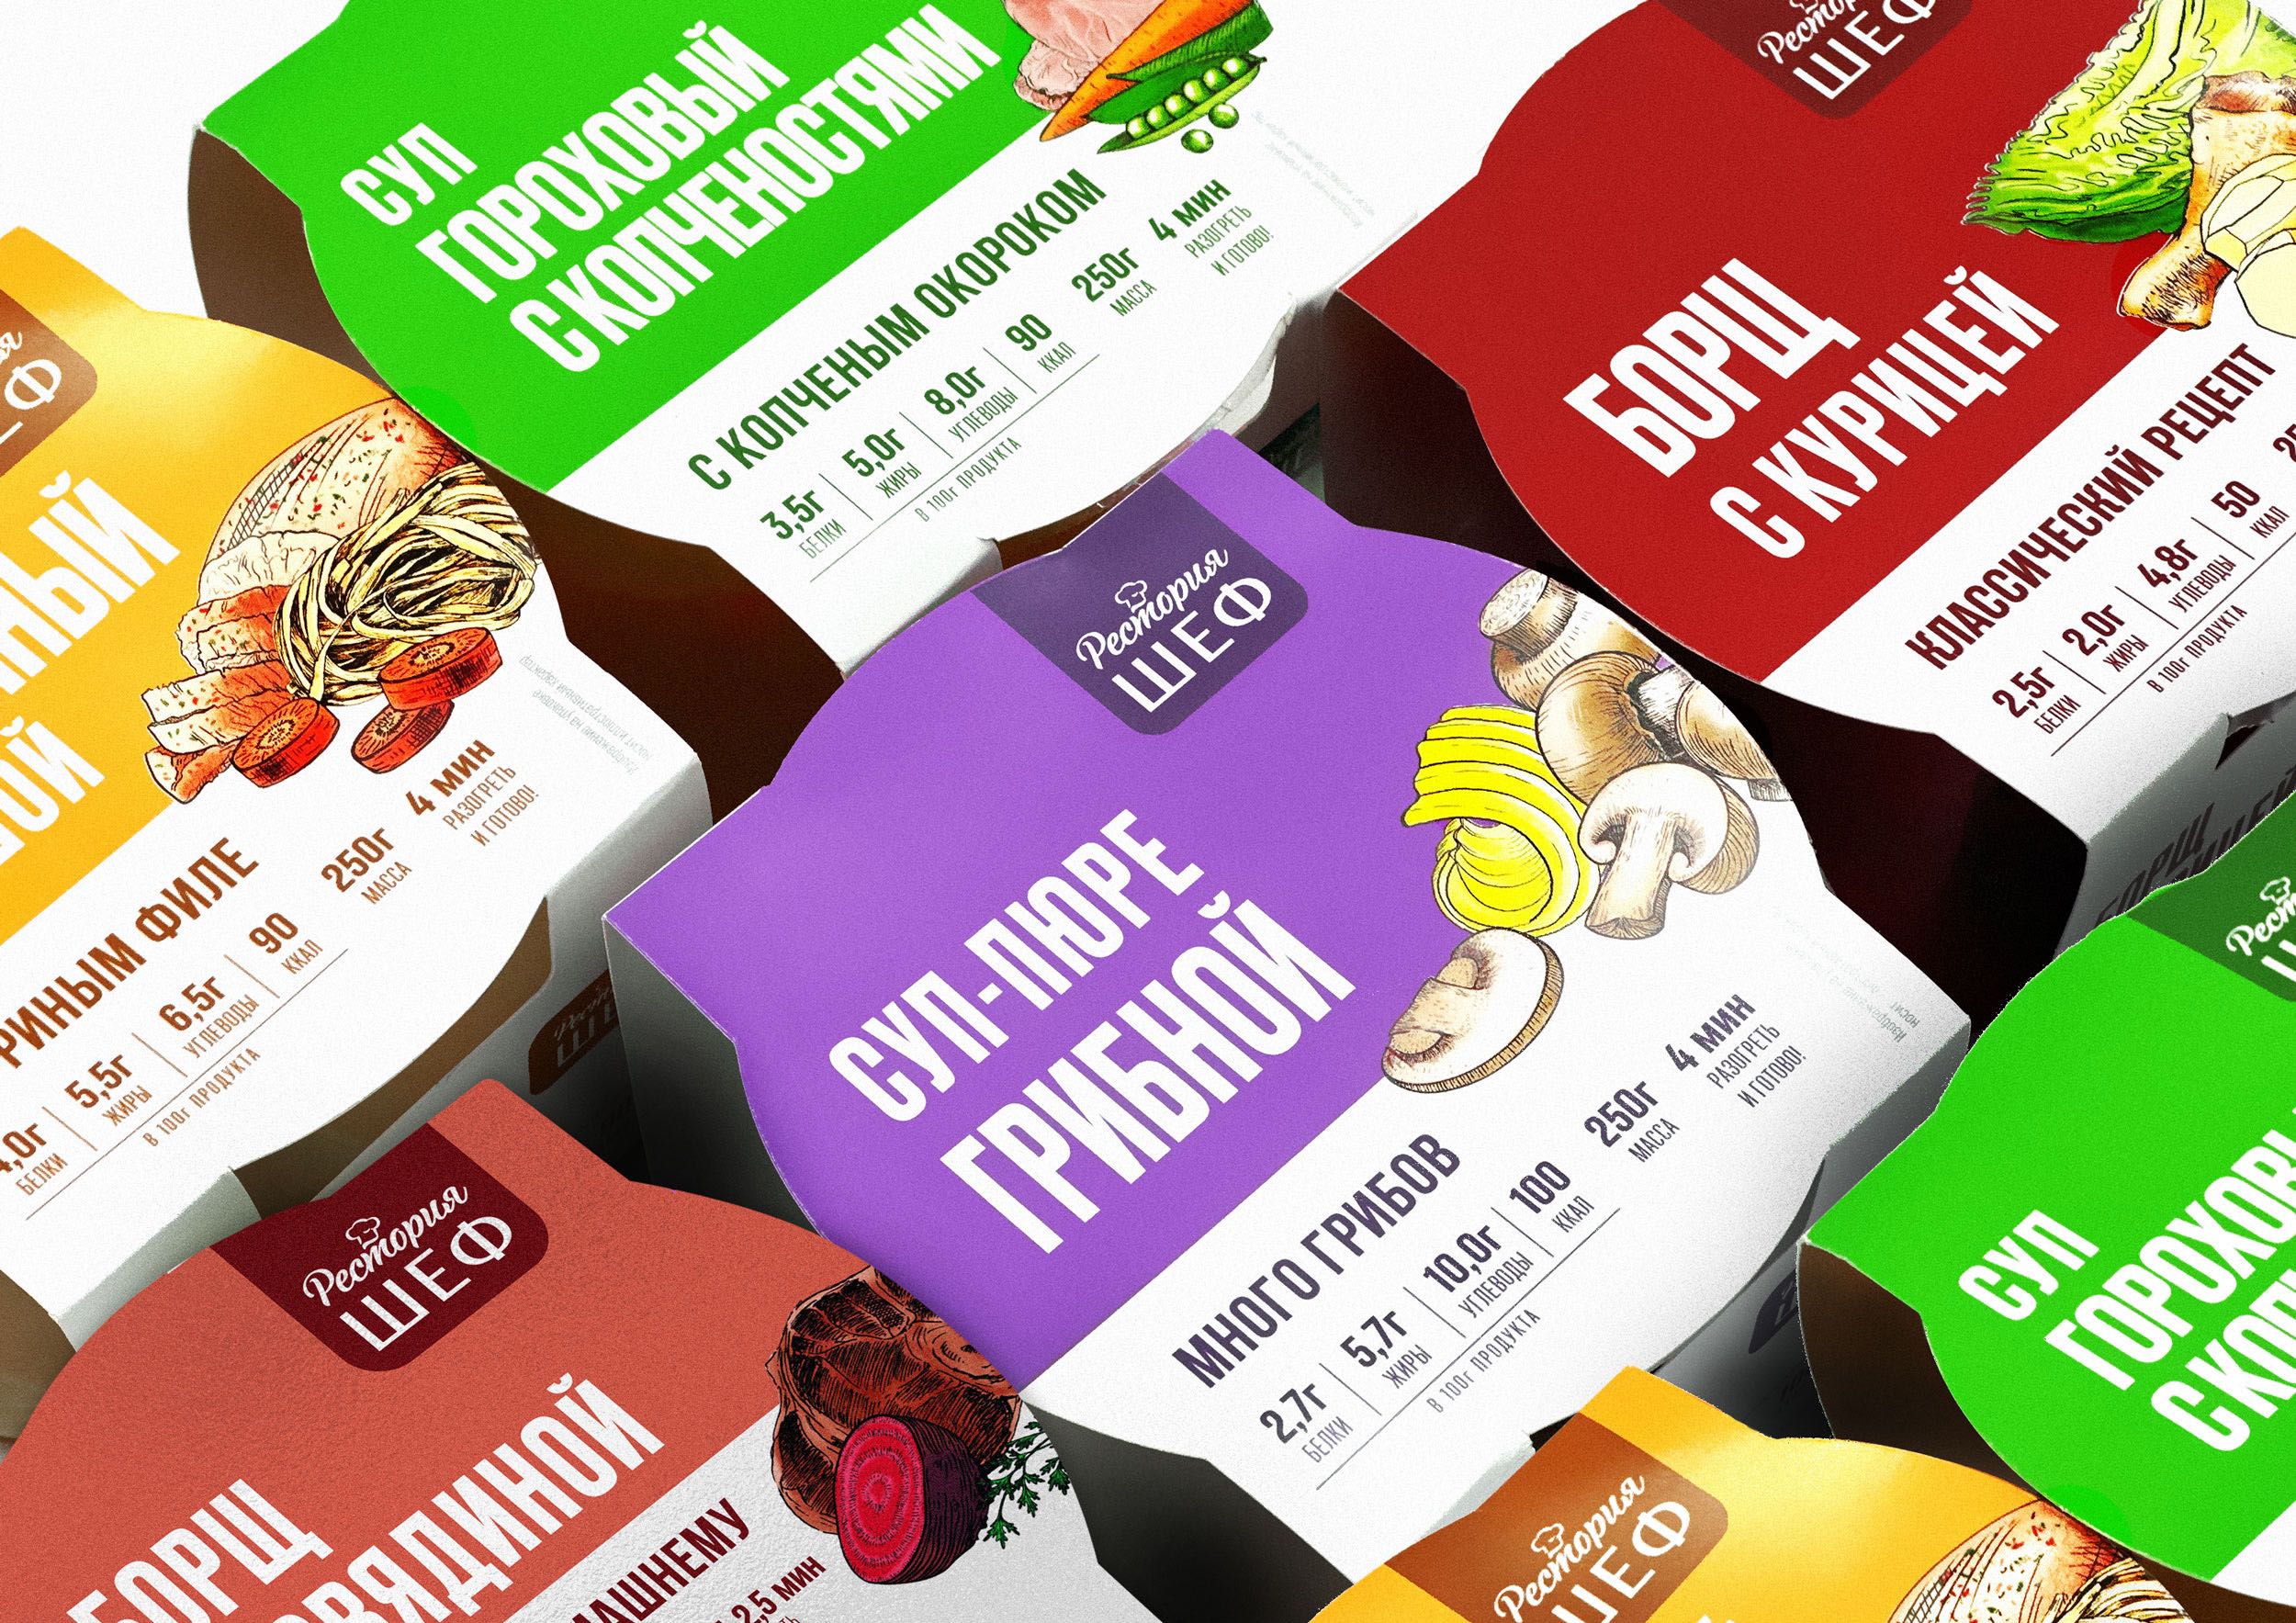 Taste Lively, Live Tastily: Ohmybrand Agency Developed a Re-design of the Restoria Chief Packaging